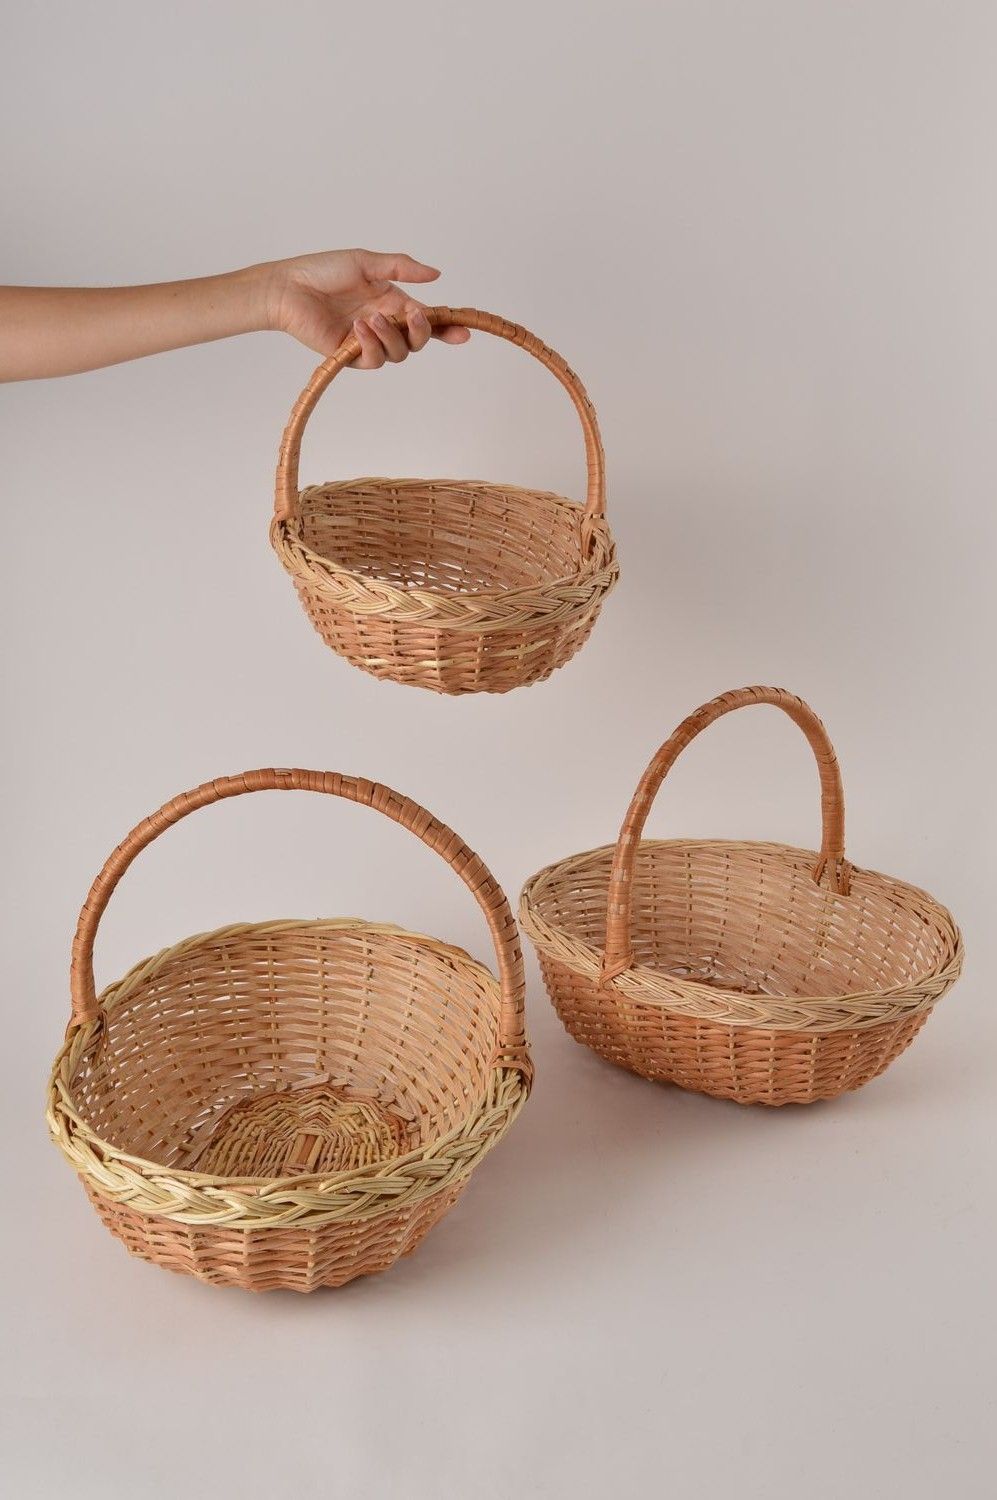 Beautiful handmade Easter basket woven basket design home goods small gifts photo 5